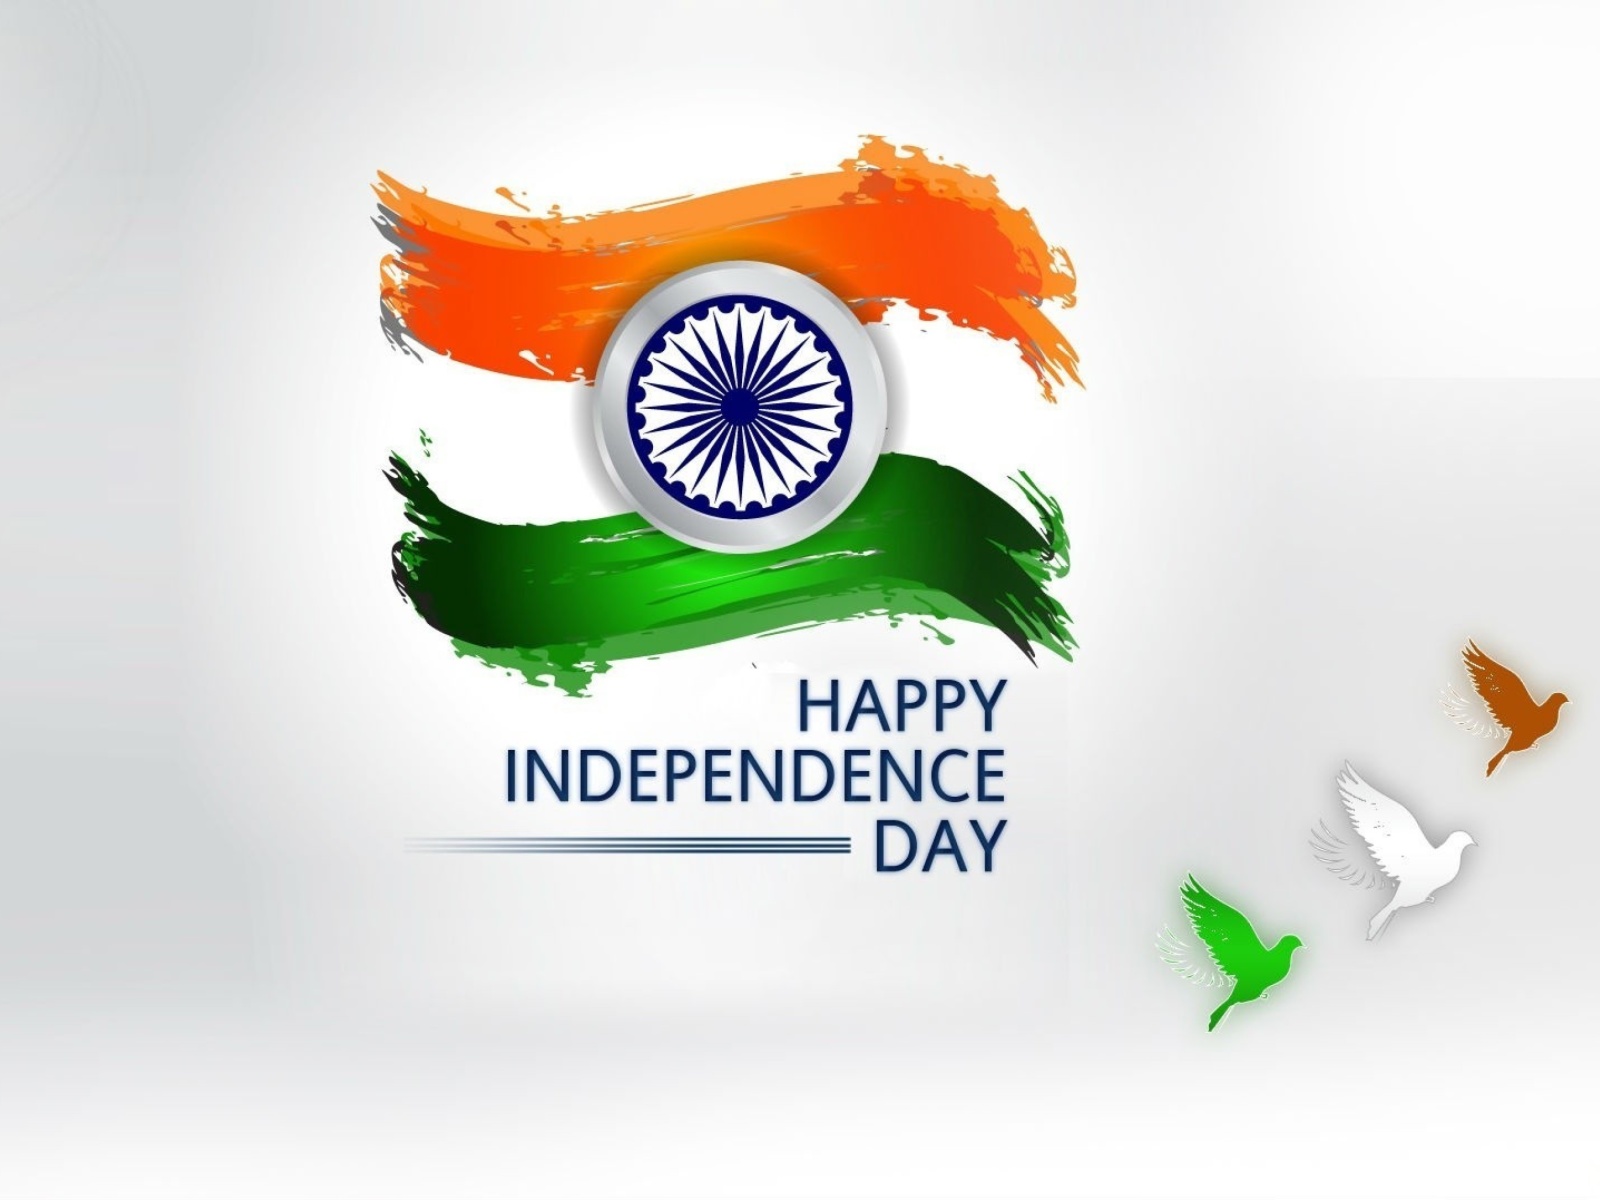 Independence Day India wallpaper 1600x1200